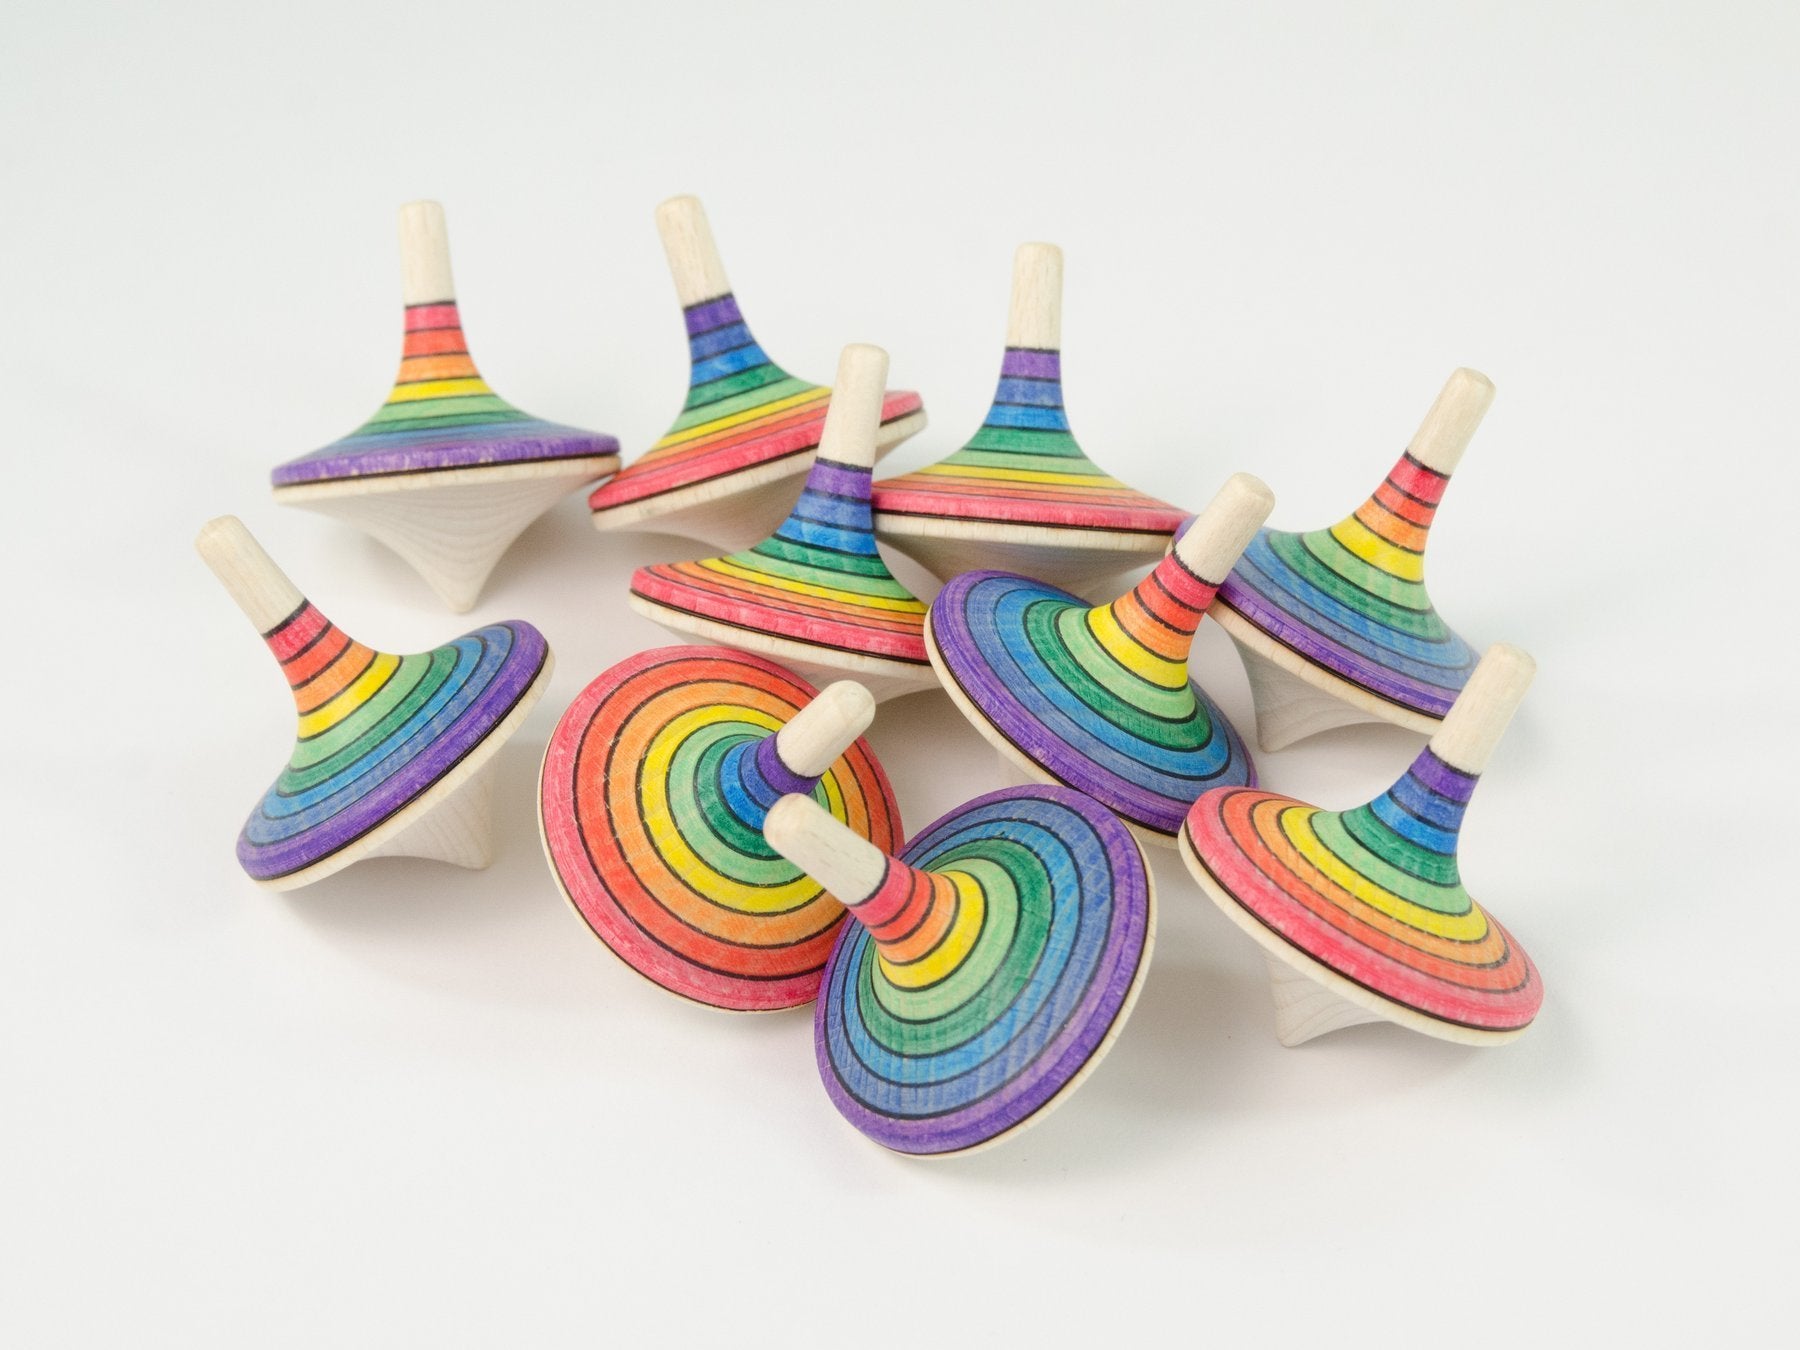 Mader Rallye Spinning Top Rainbow (Red Outside) - thetinycrate